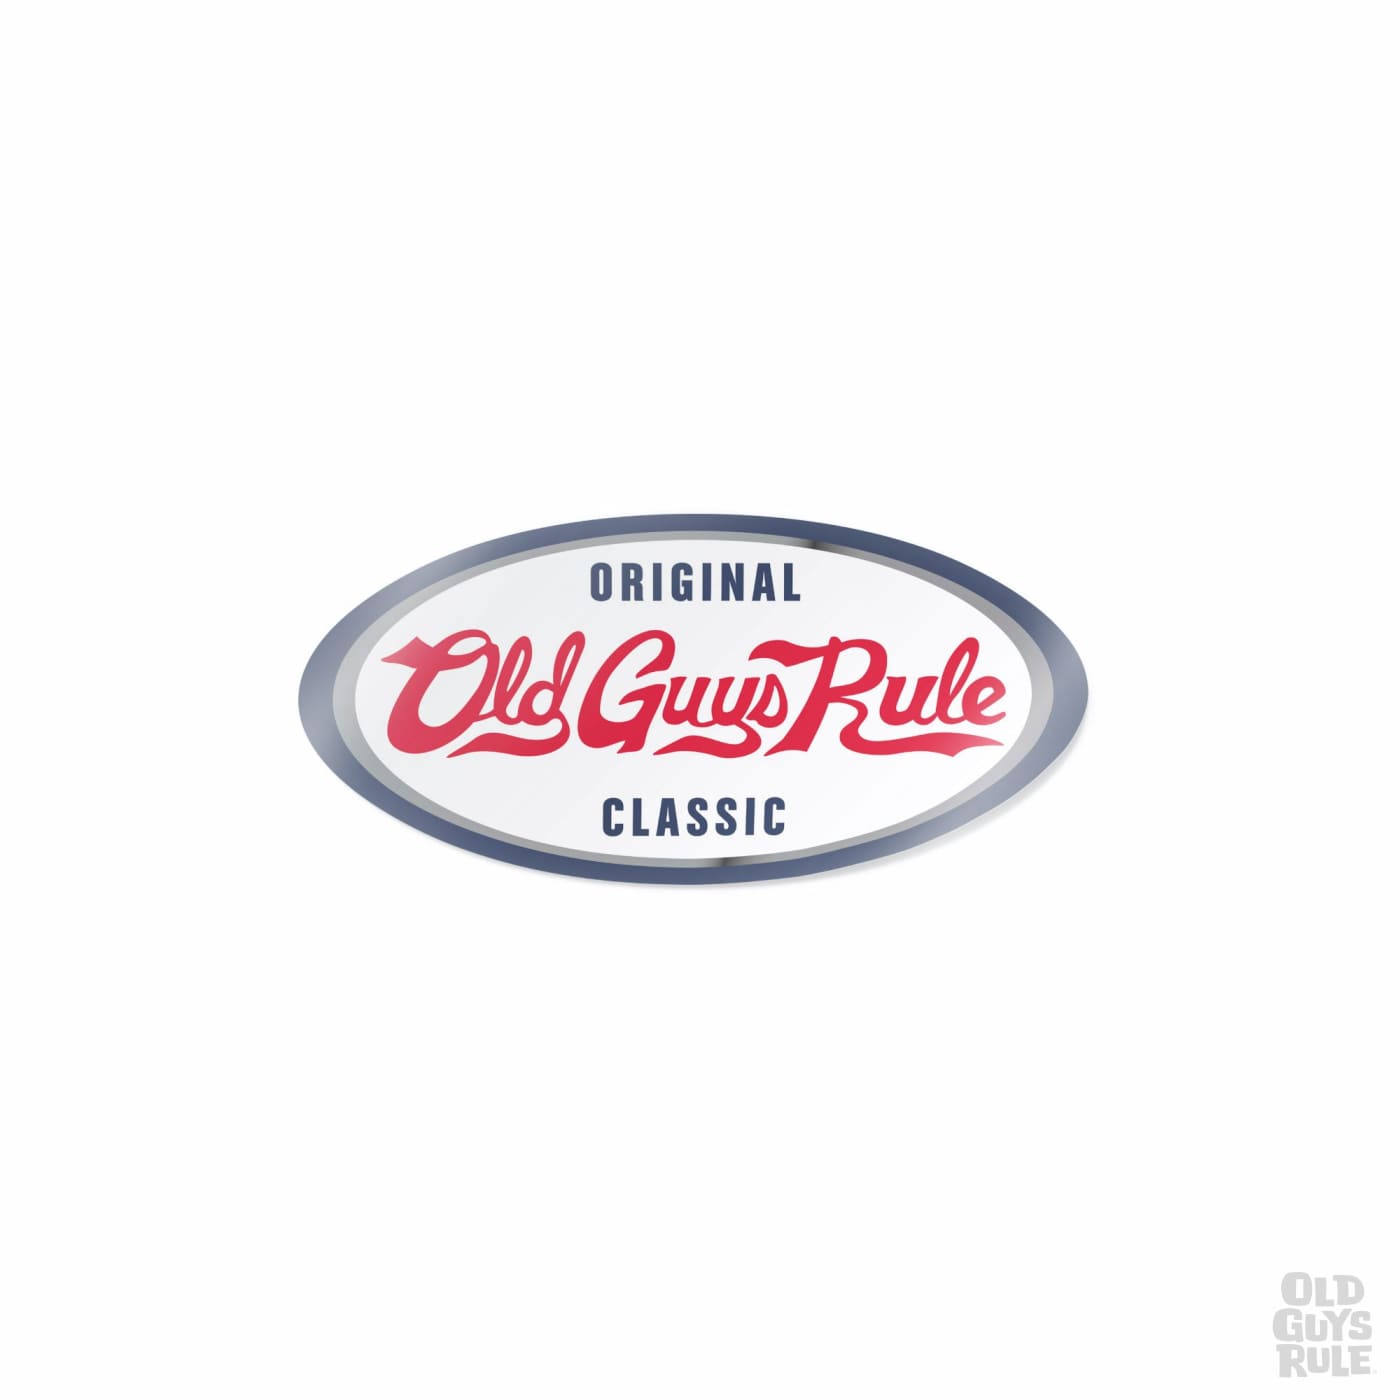 Old Guys Rule Original Classic Decal